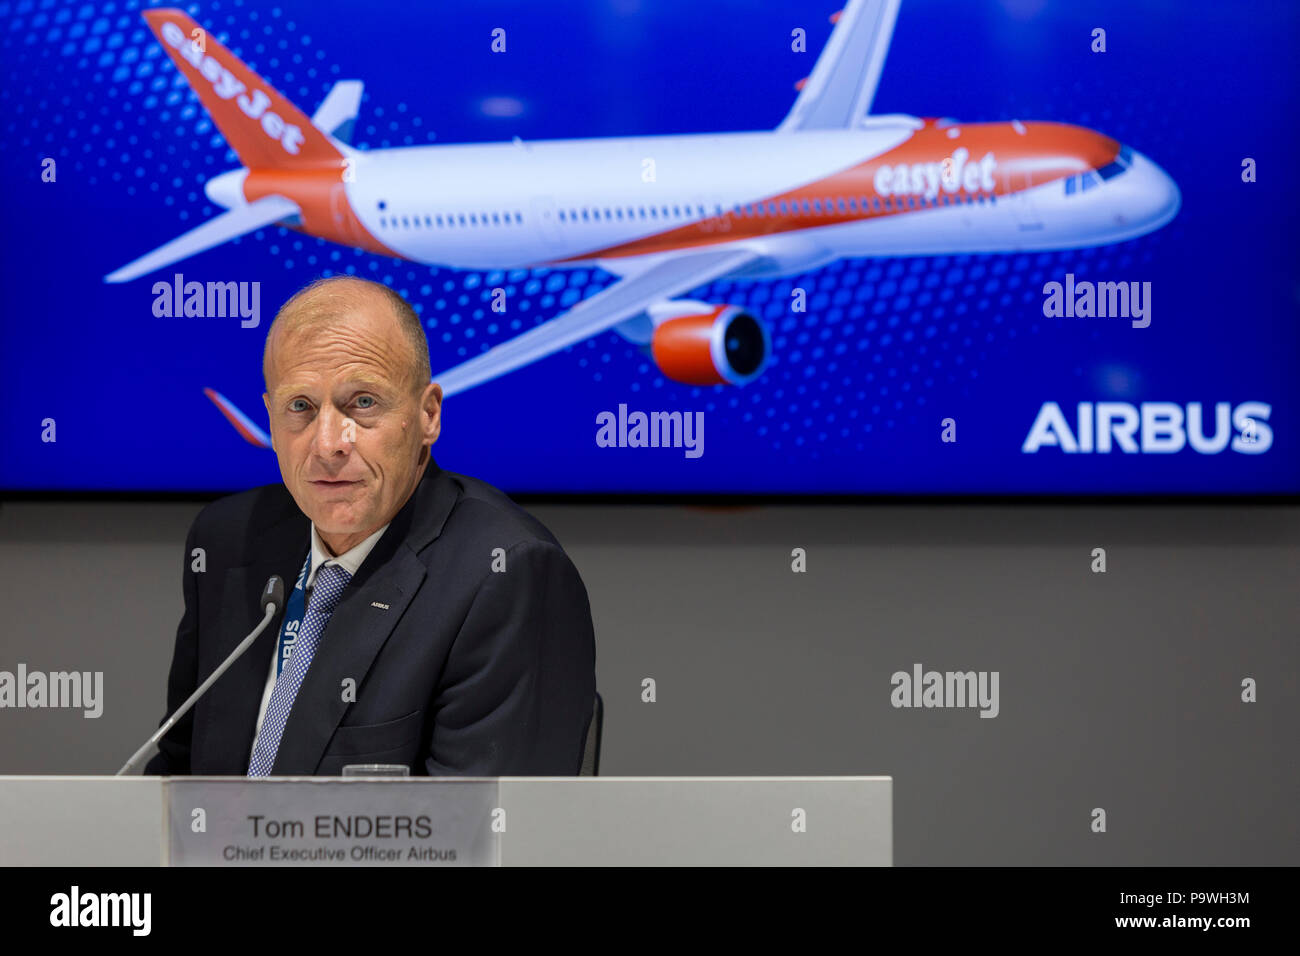 The CEO of Airbus Industries, Tom Enders at the Farnborough Airshow, on 18th July 2018, in Farnborough, England. Stock Photo